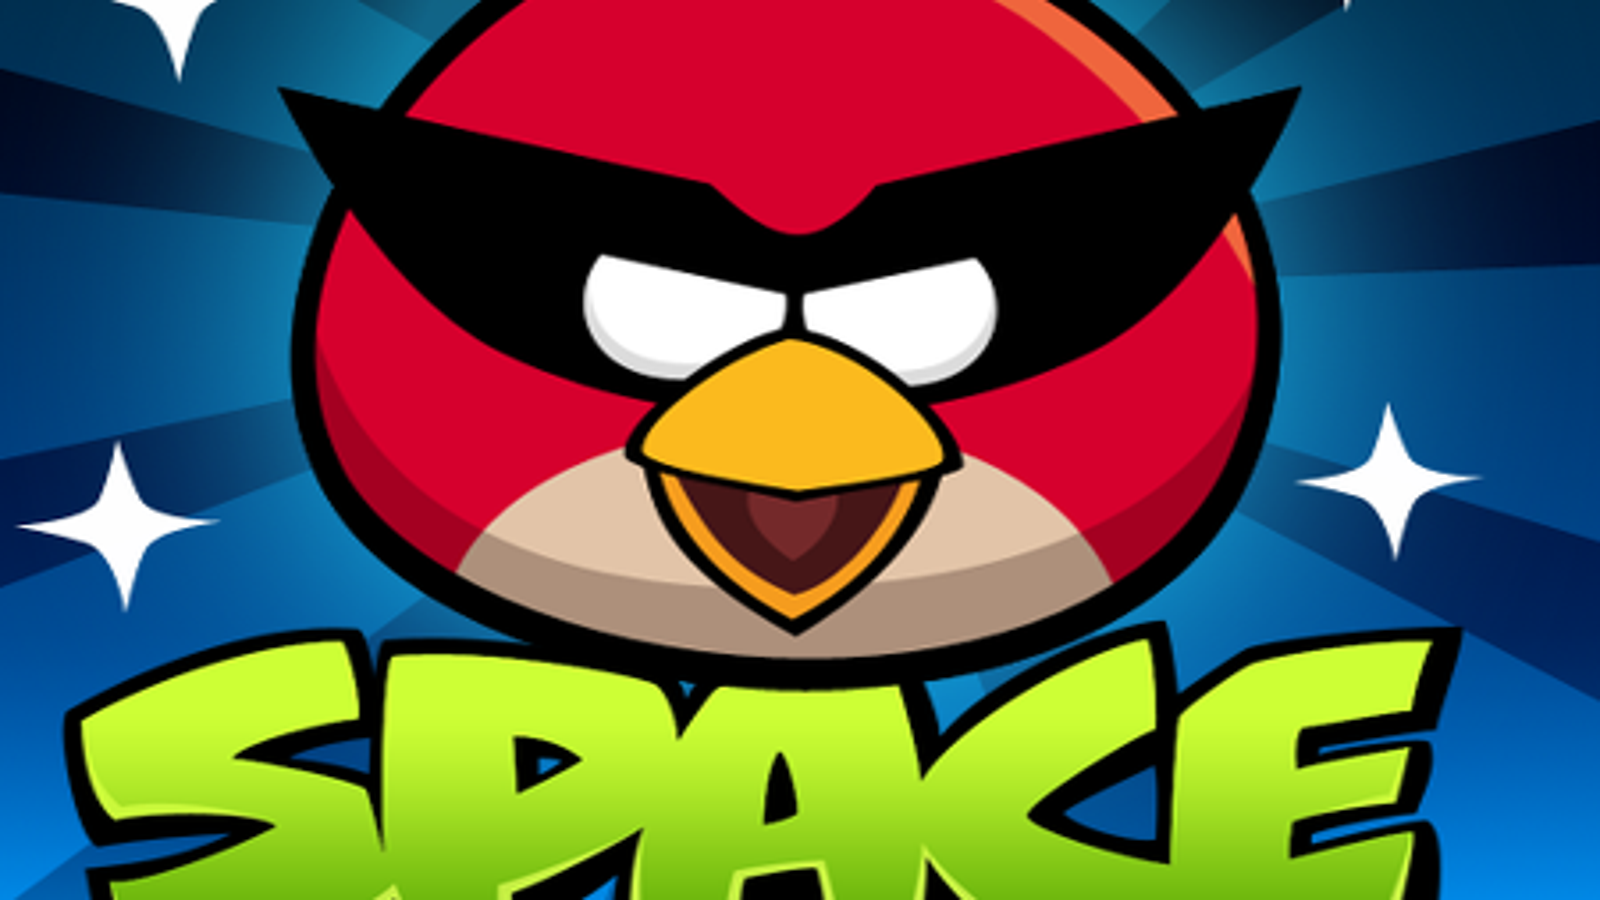 Angry Birds Space For iOS, Android, PC & Mac Now Available For